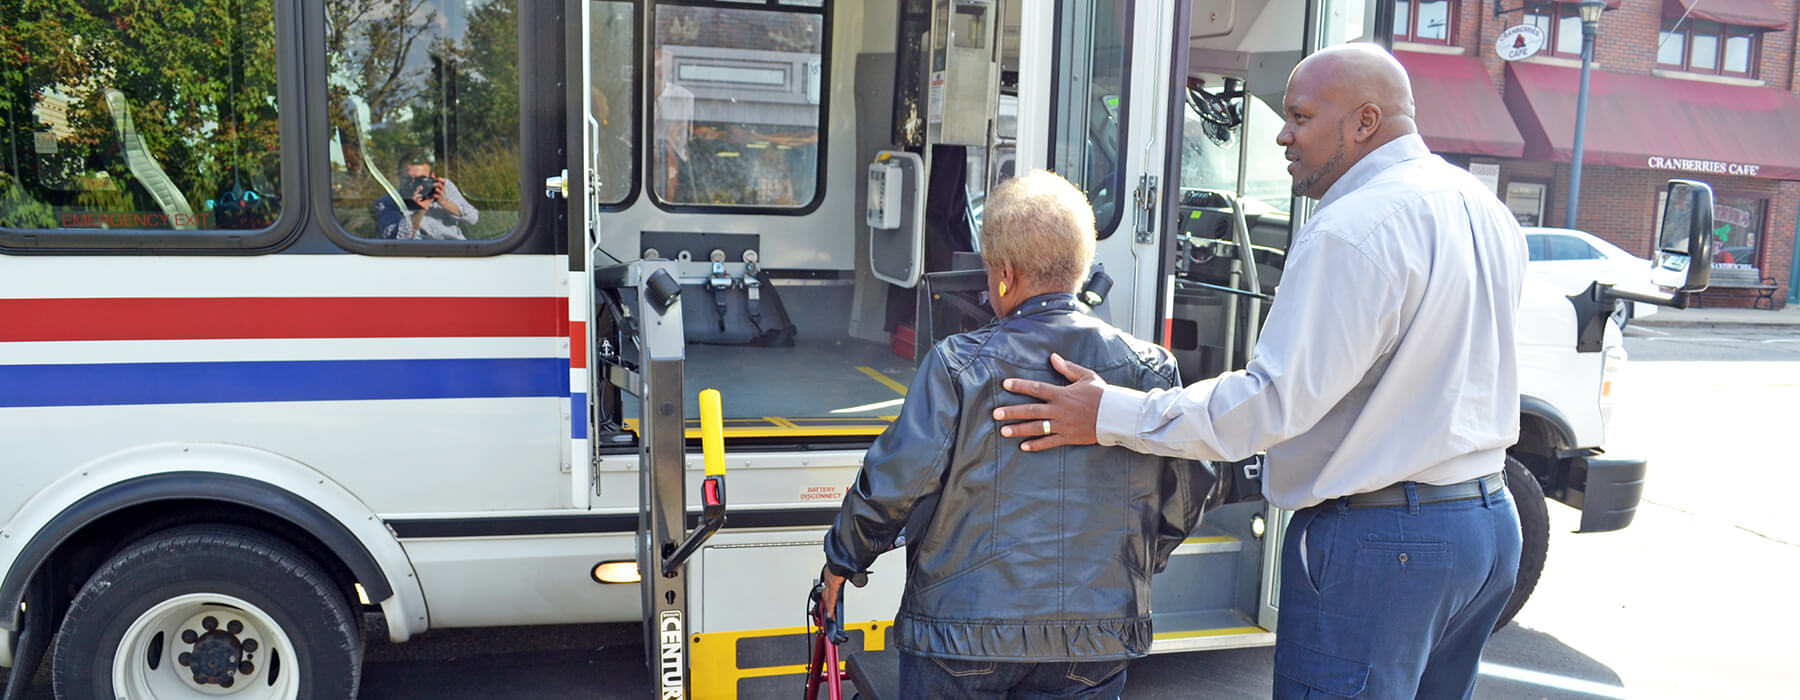 Elderly woman with walker boarding Your Ride bus with lift, assisted by the driver.